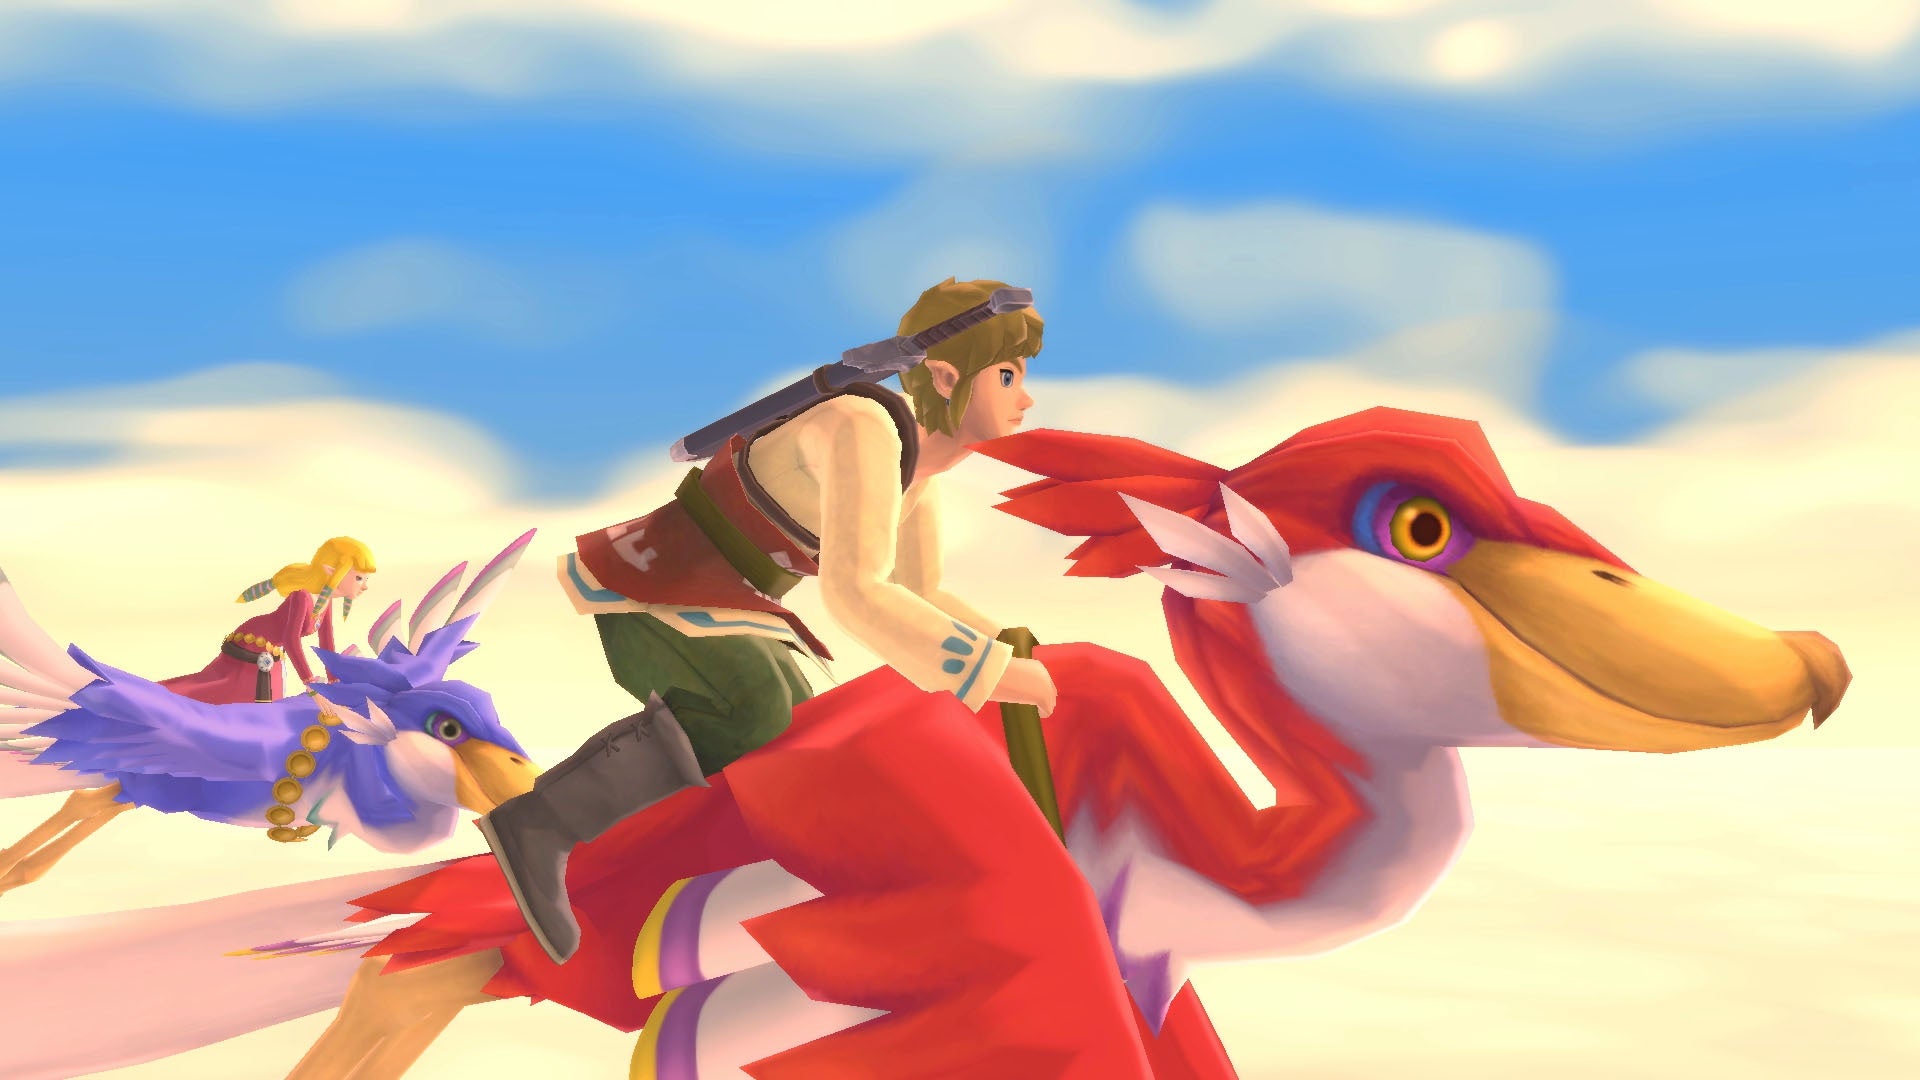 Image for The Legend of Zelda: Skyward Sword was July's best selling game in the US - NPD